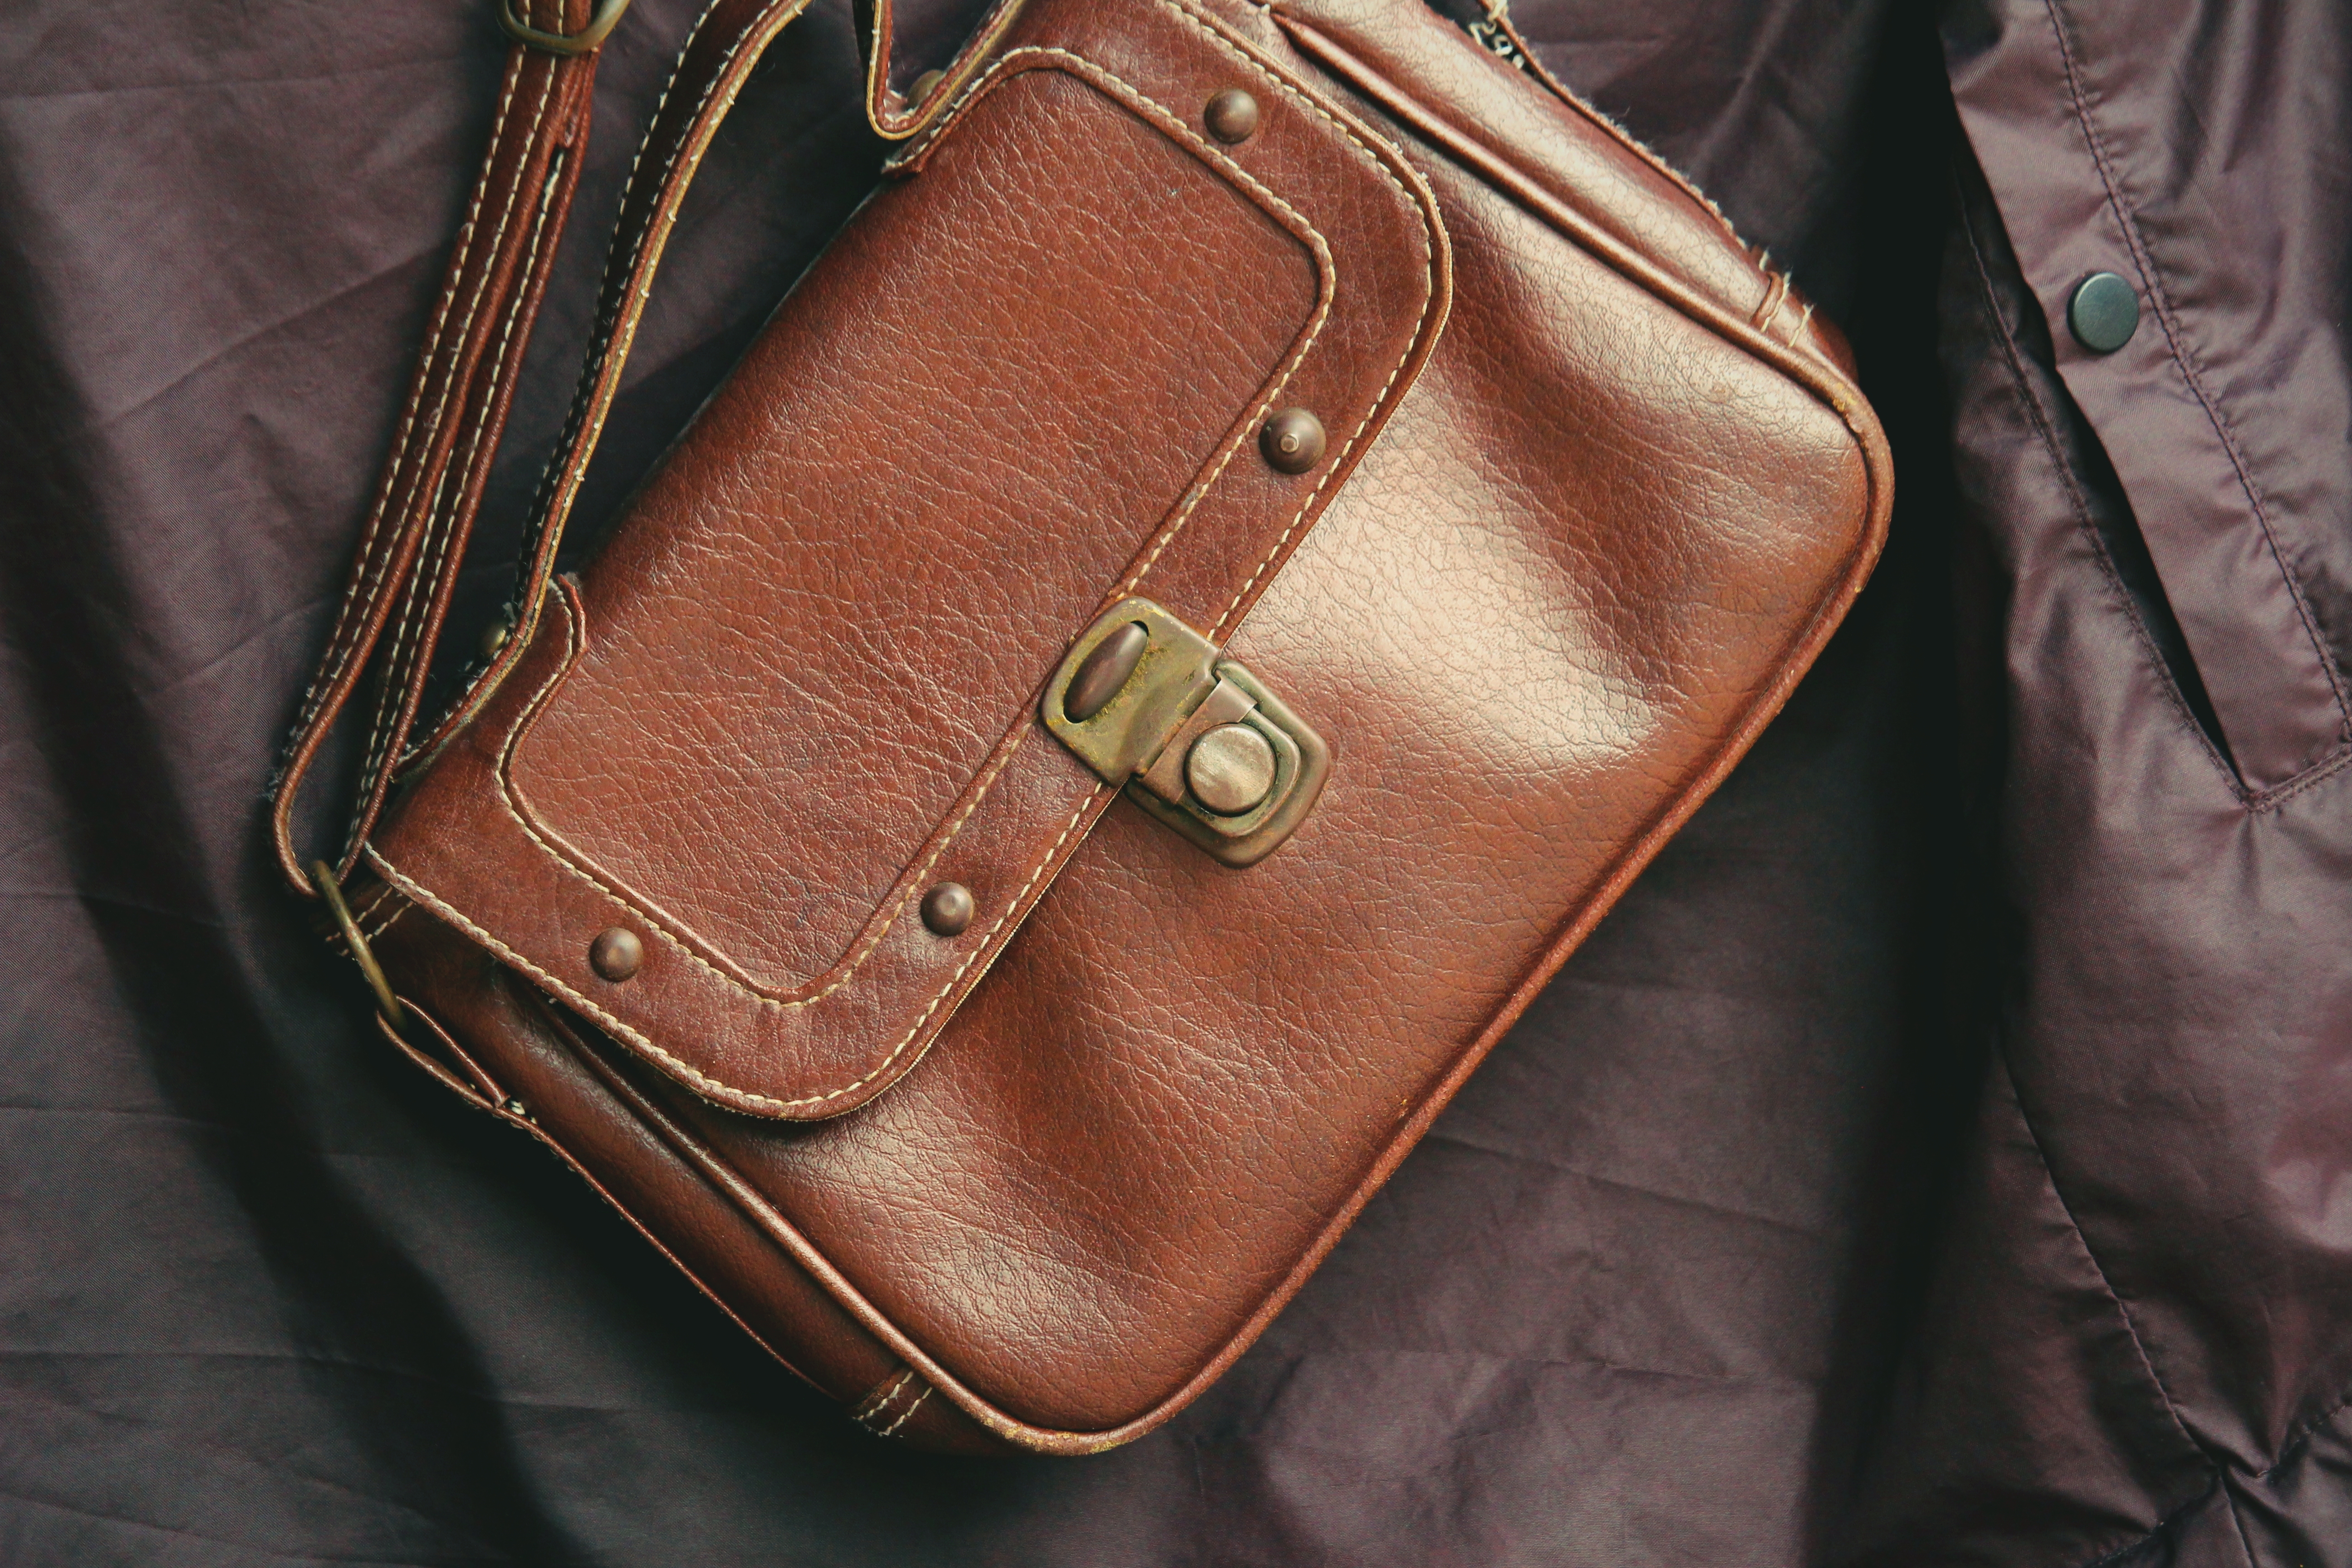 Leather bag| Source: Shutterstock